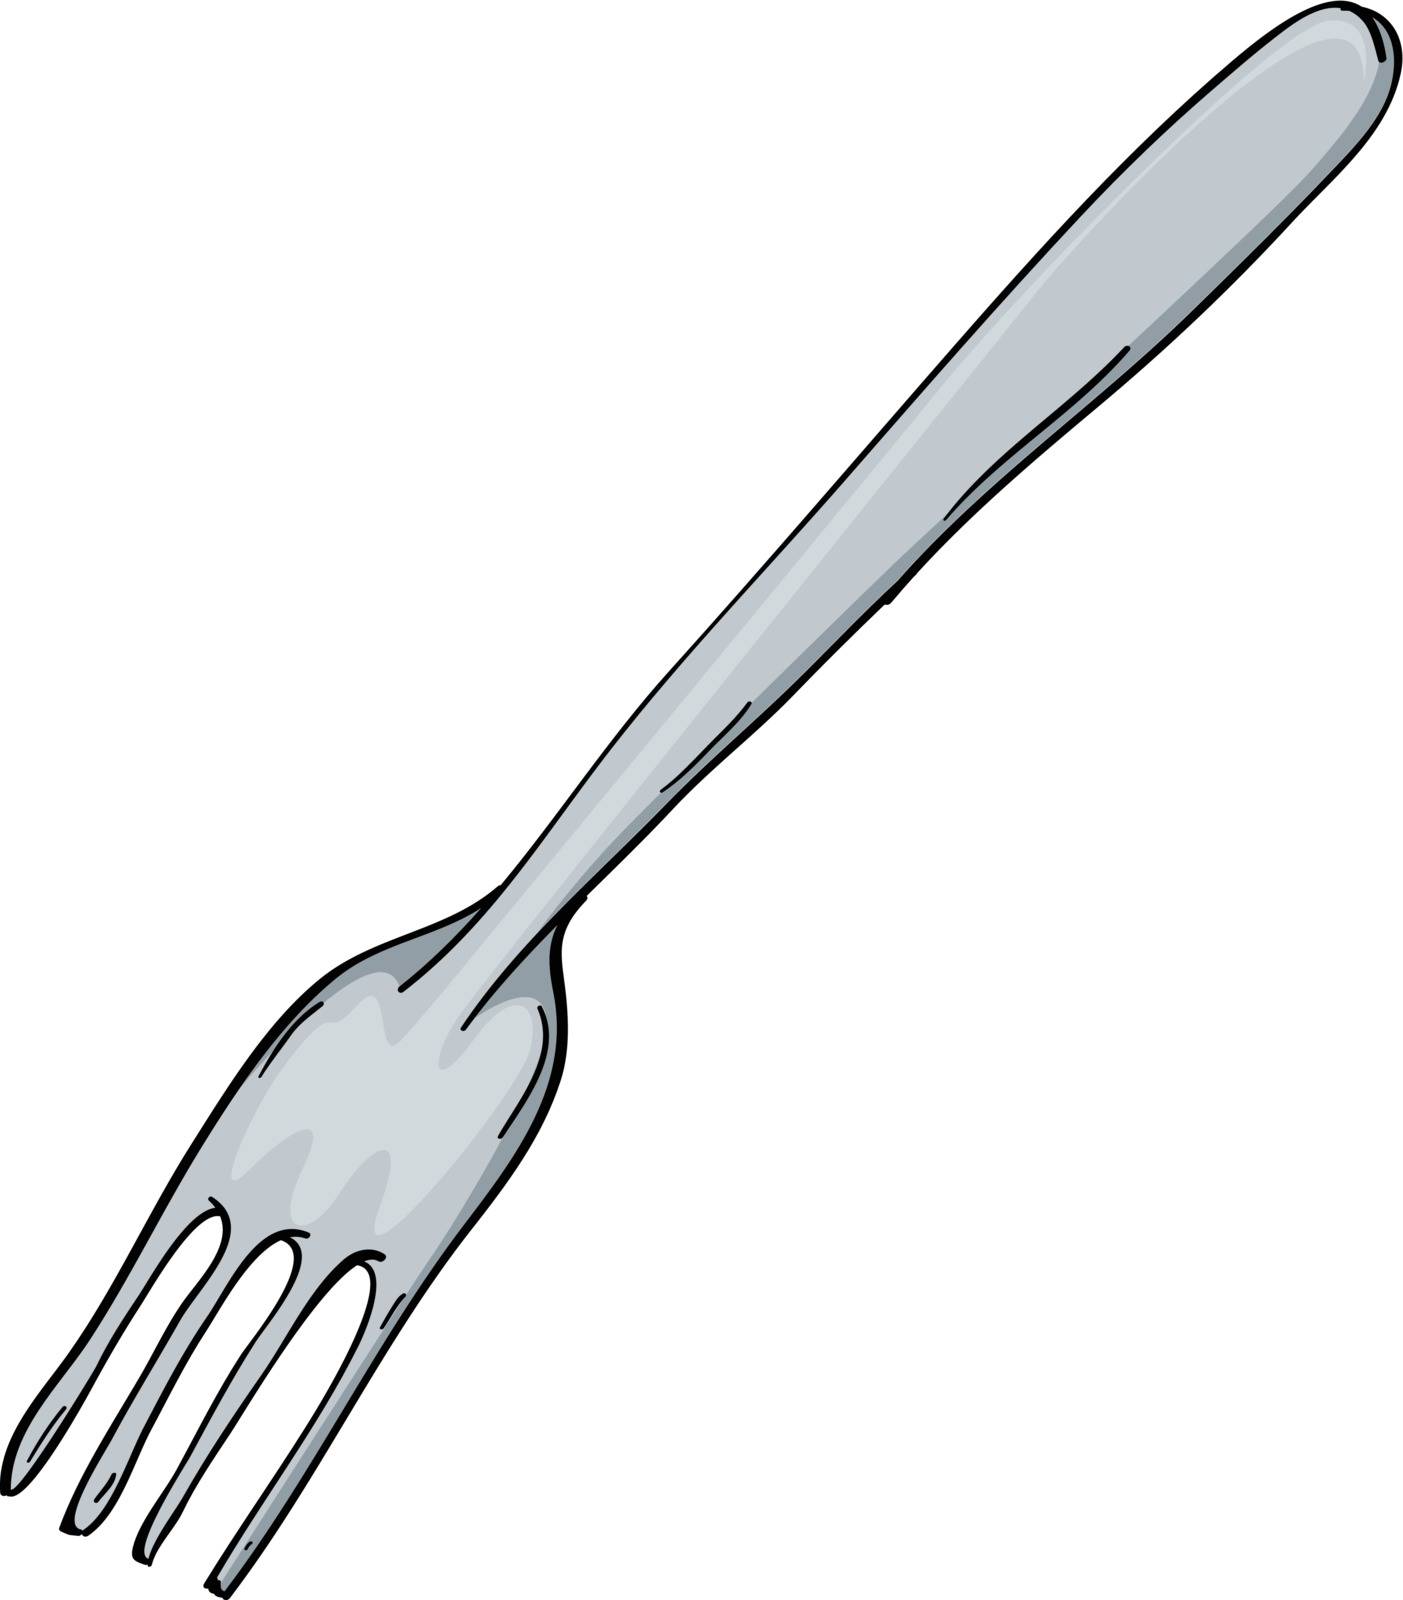 detailed illustration of a fork on a white background